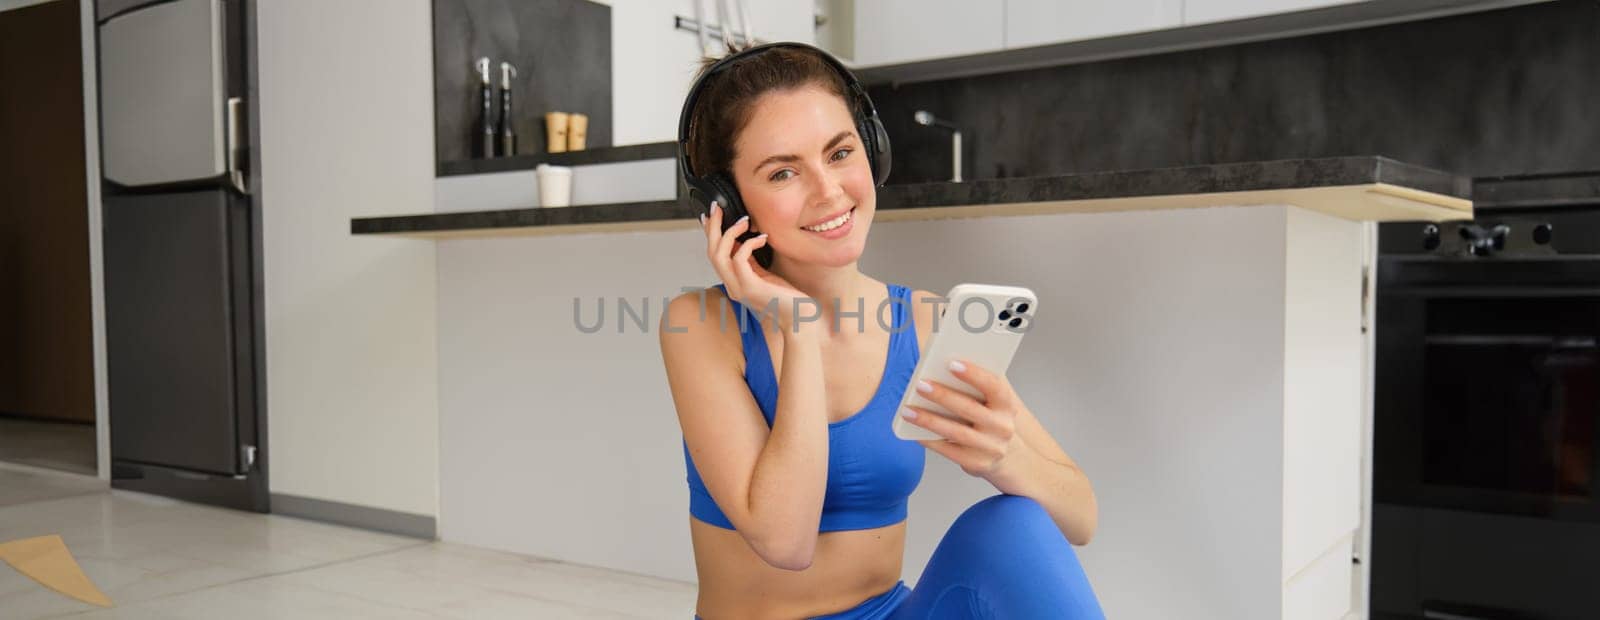 Smiling woman puts on music on smartphone to workout at home, wears wireless headphones, listens to meditation mantra during training session.